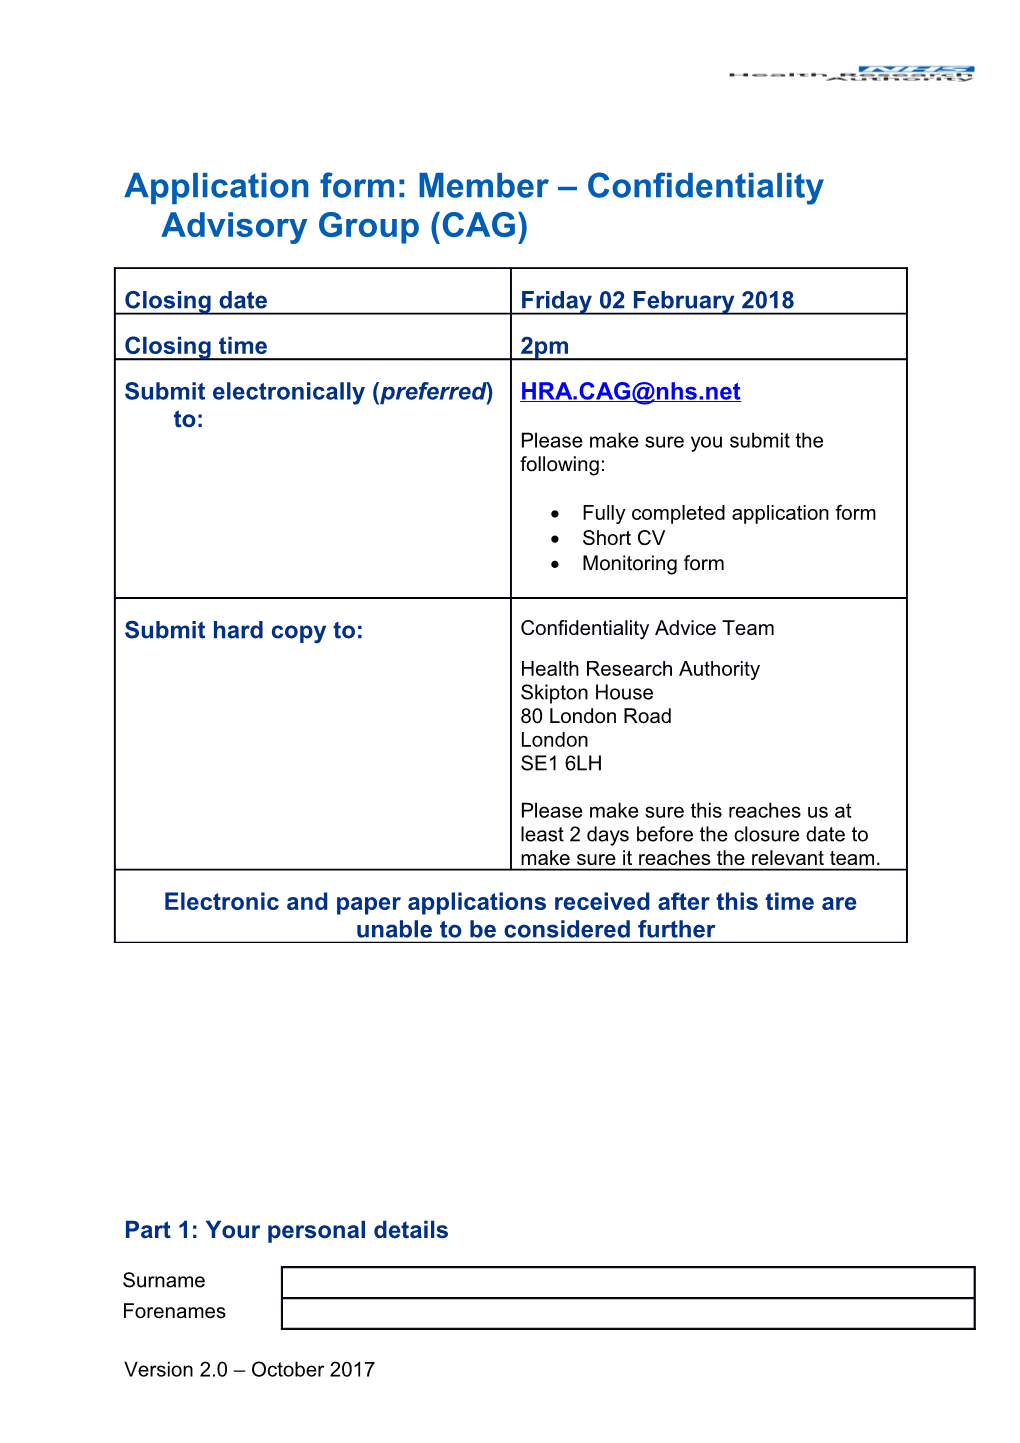 Application Form: Member Confidentiality Advisory Group (CAG)